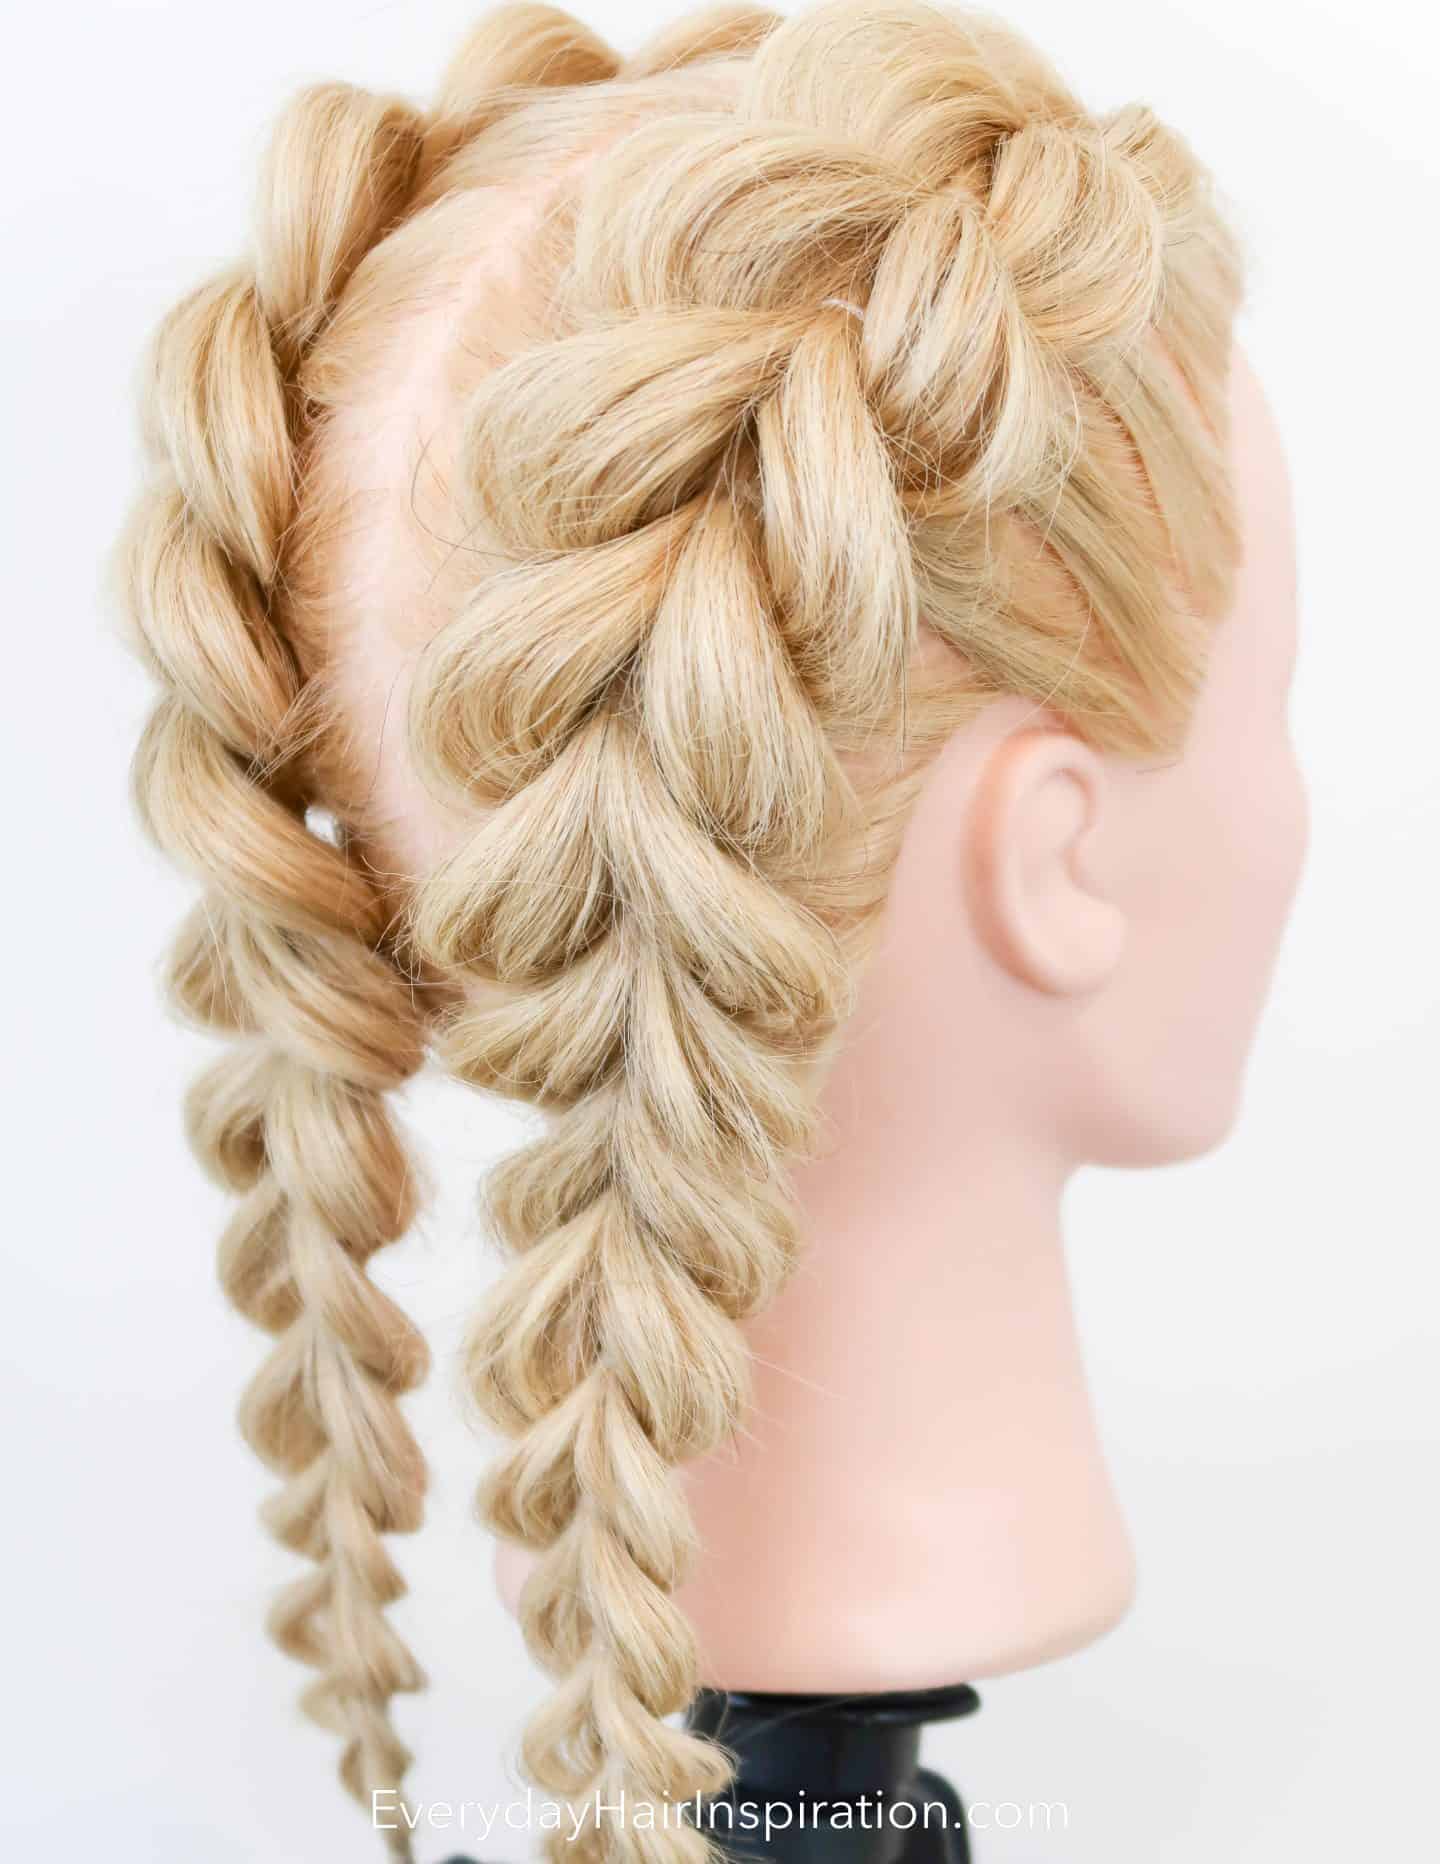 Image of Pull-through braid hairstyle